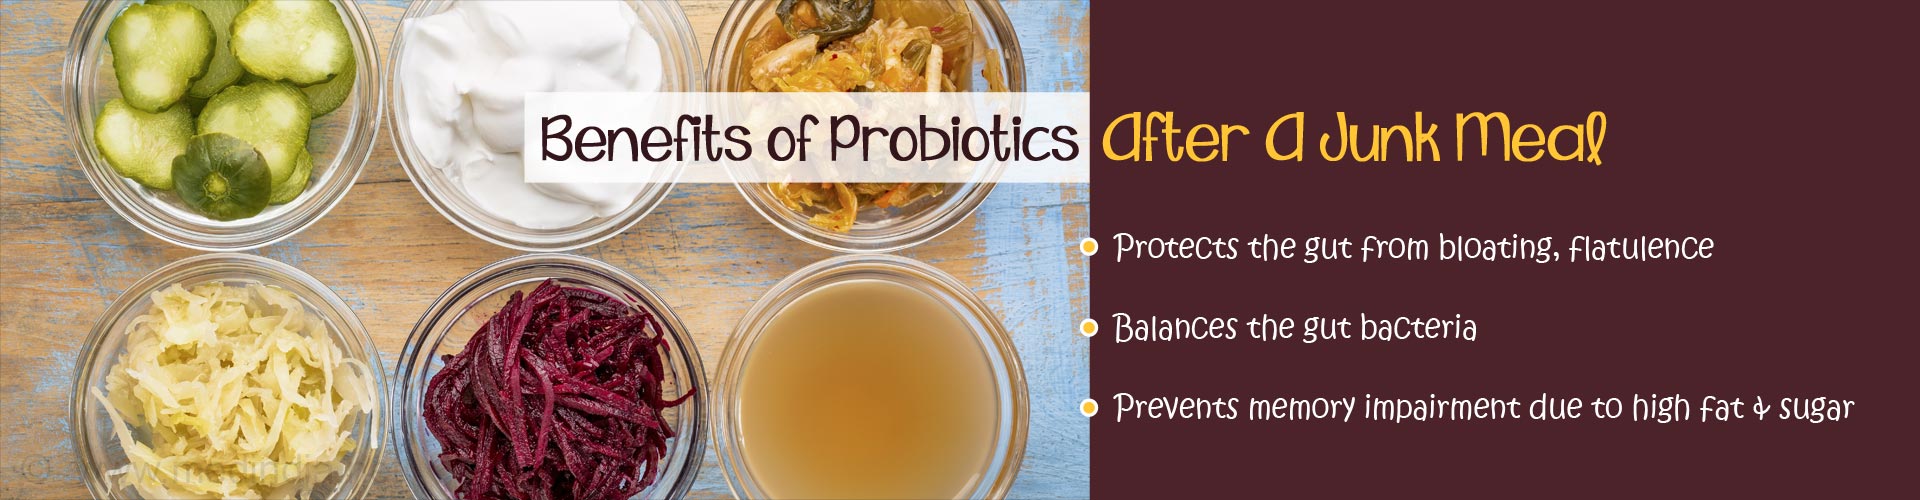 benefits of probiotics after a junk meal
- protects the gut from bloating, flatulence
- balances the gut bacteria
- prevents memory impairment due to high fat and sugar